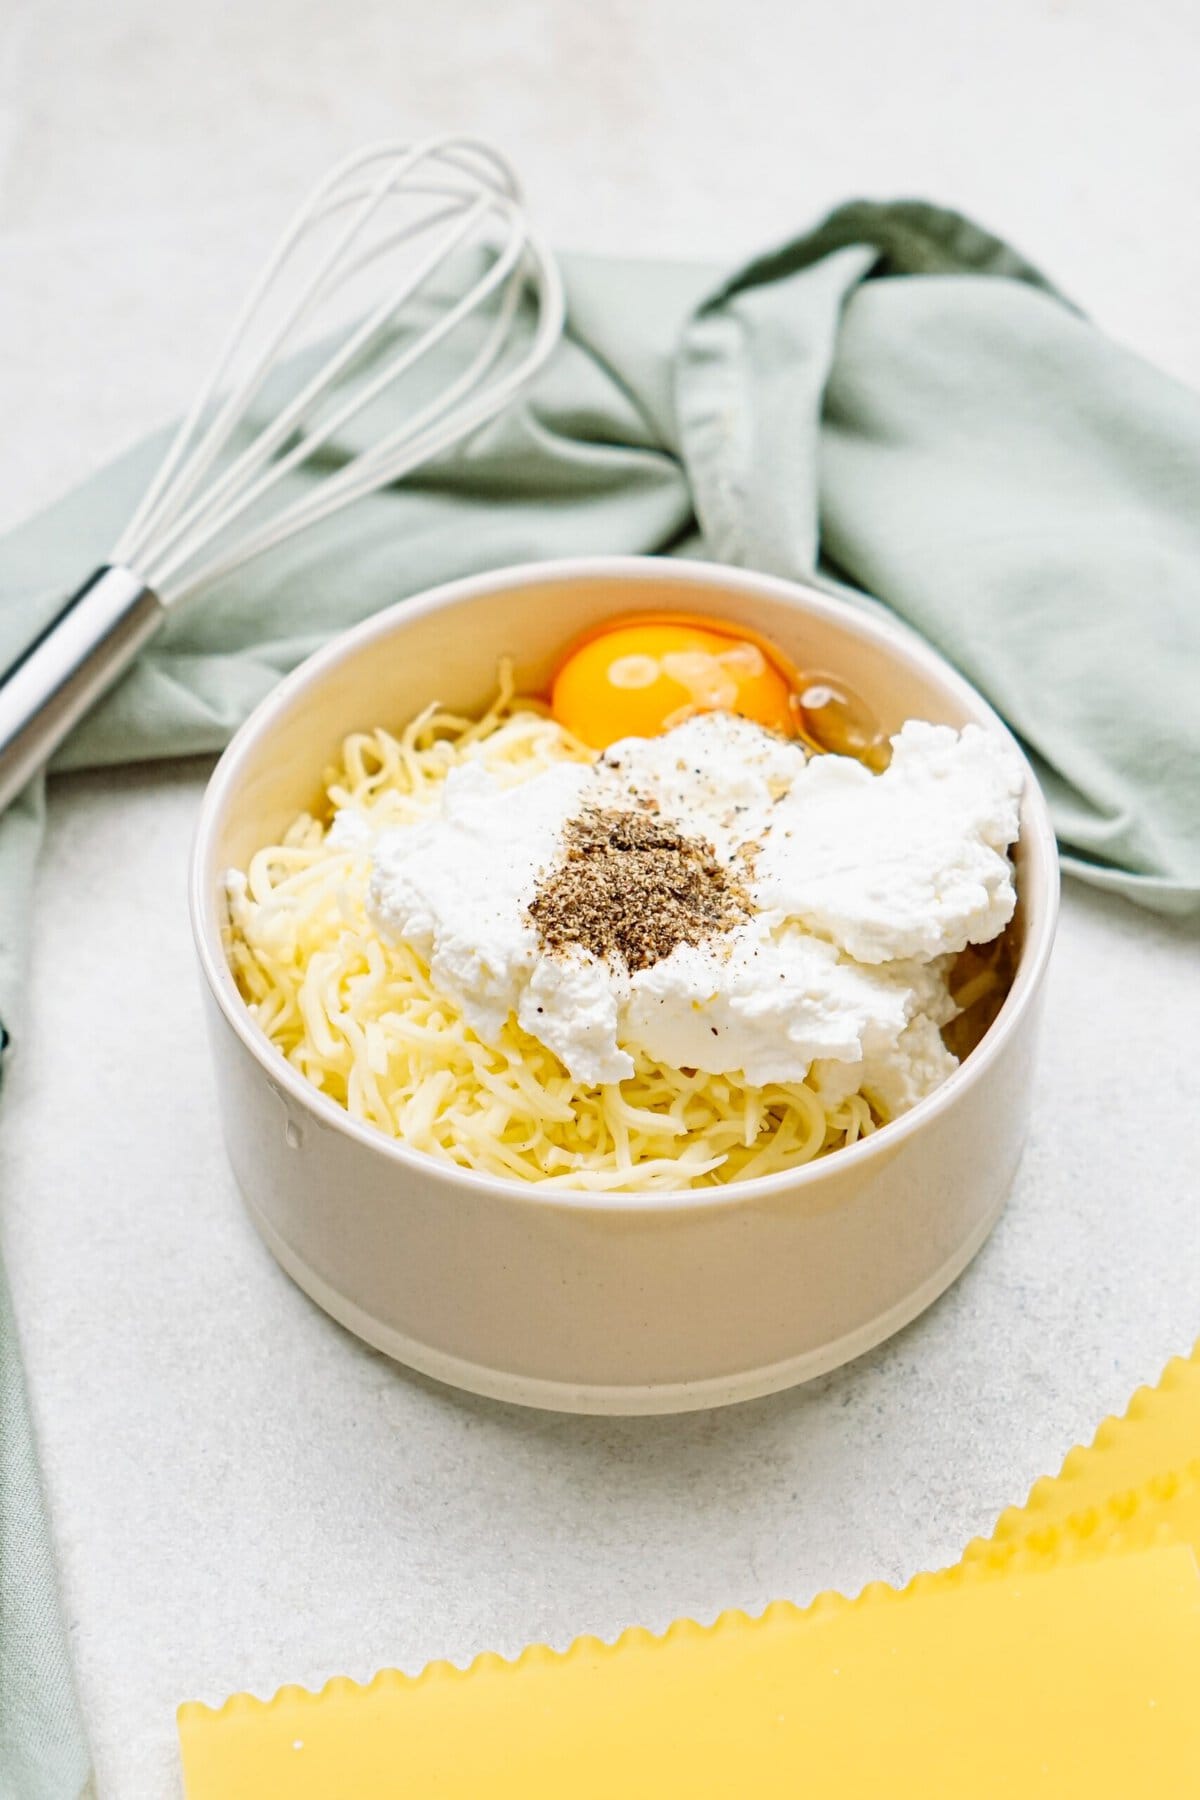 A bowl containing shredded cheese, ricotta, cracked egg, and seasoning sits on a countertop next to a whisk and a green cloth.